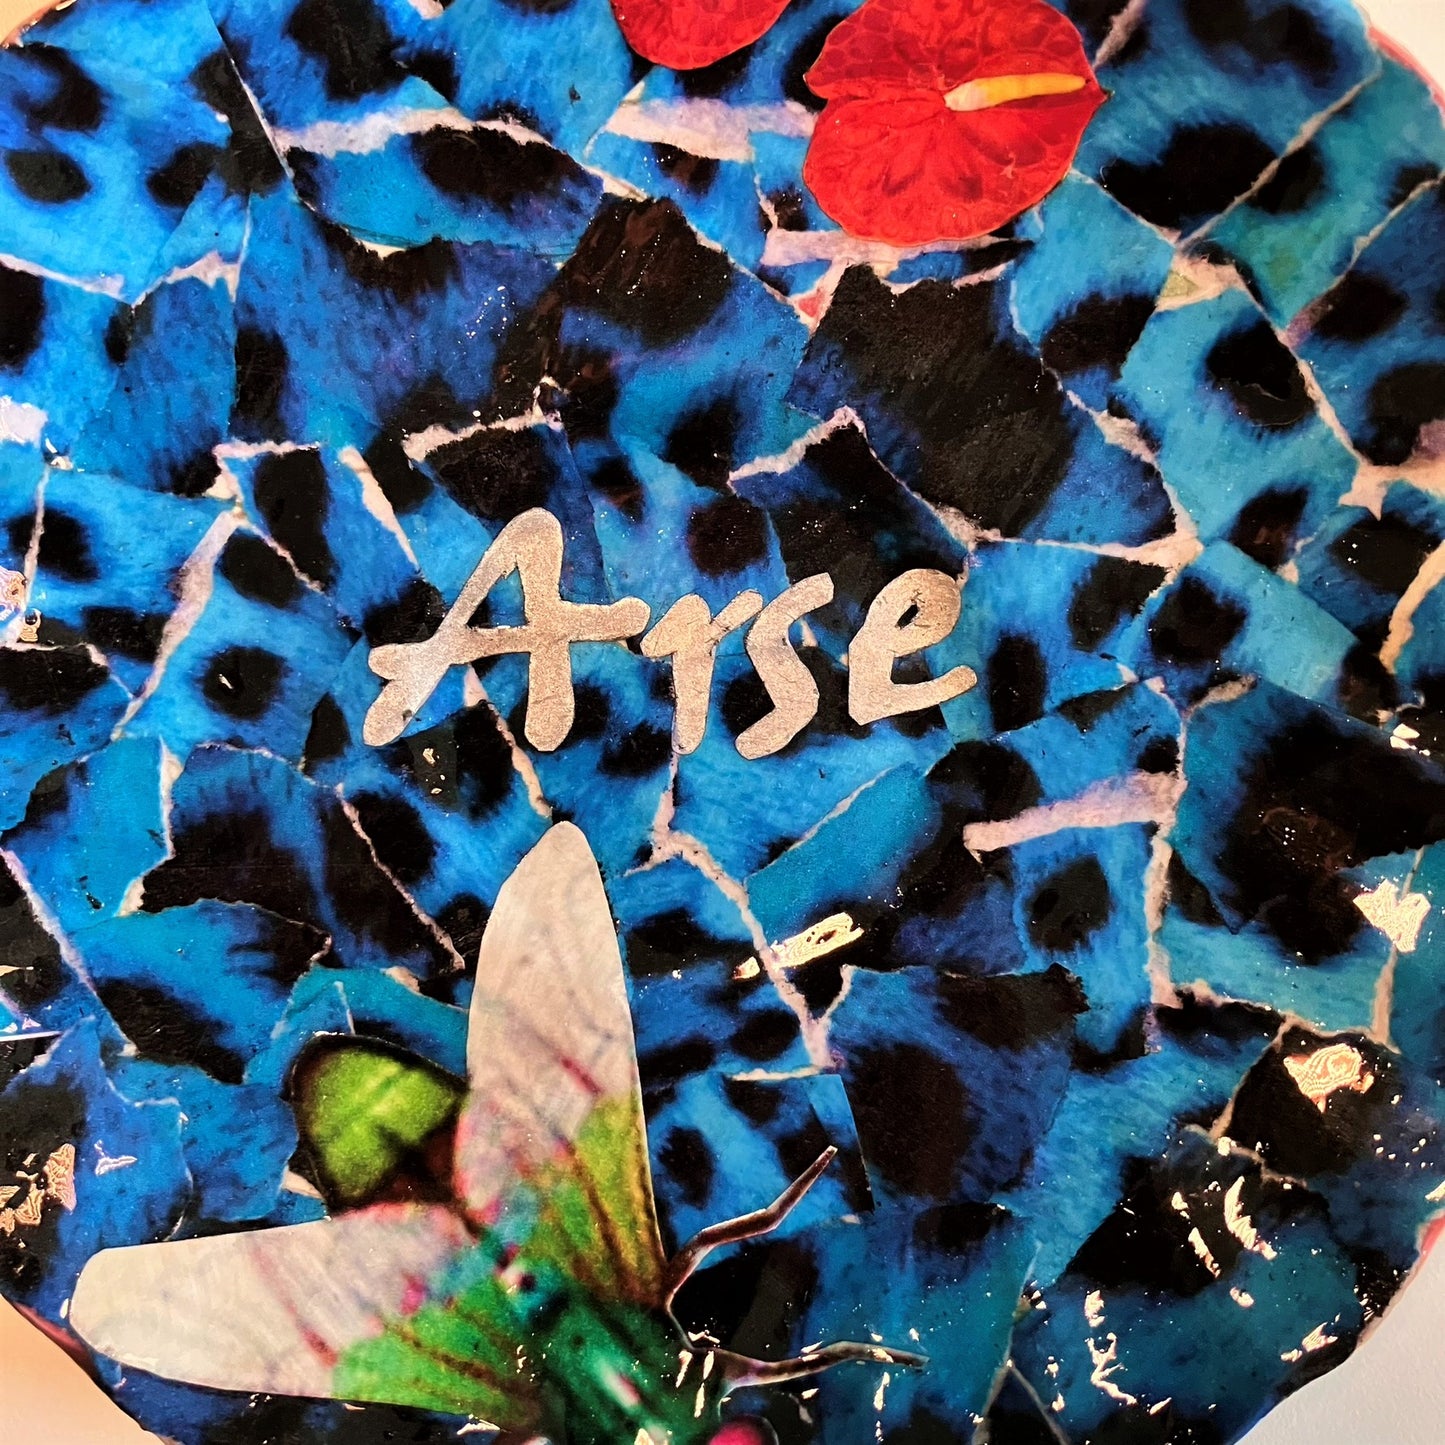 Blue Upcycled Wall Plate - "Arse" - by House of Frisson